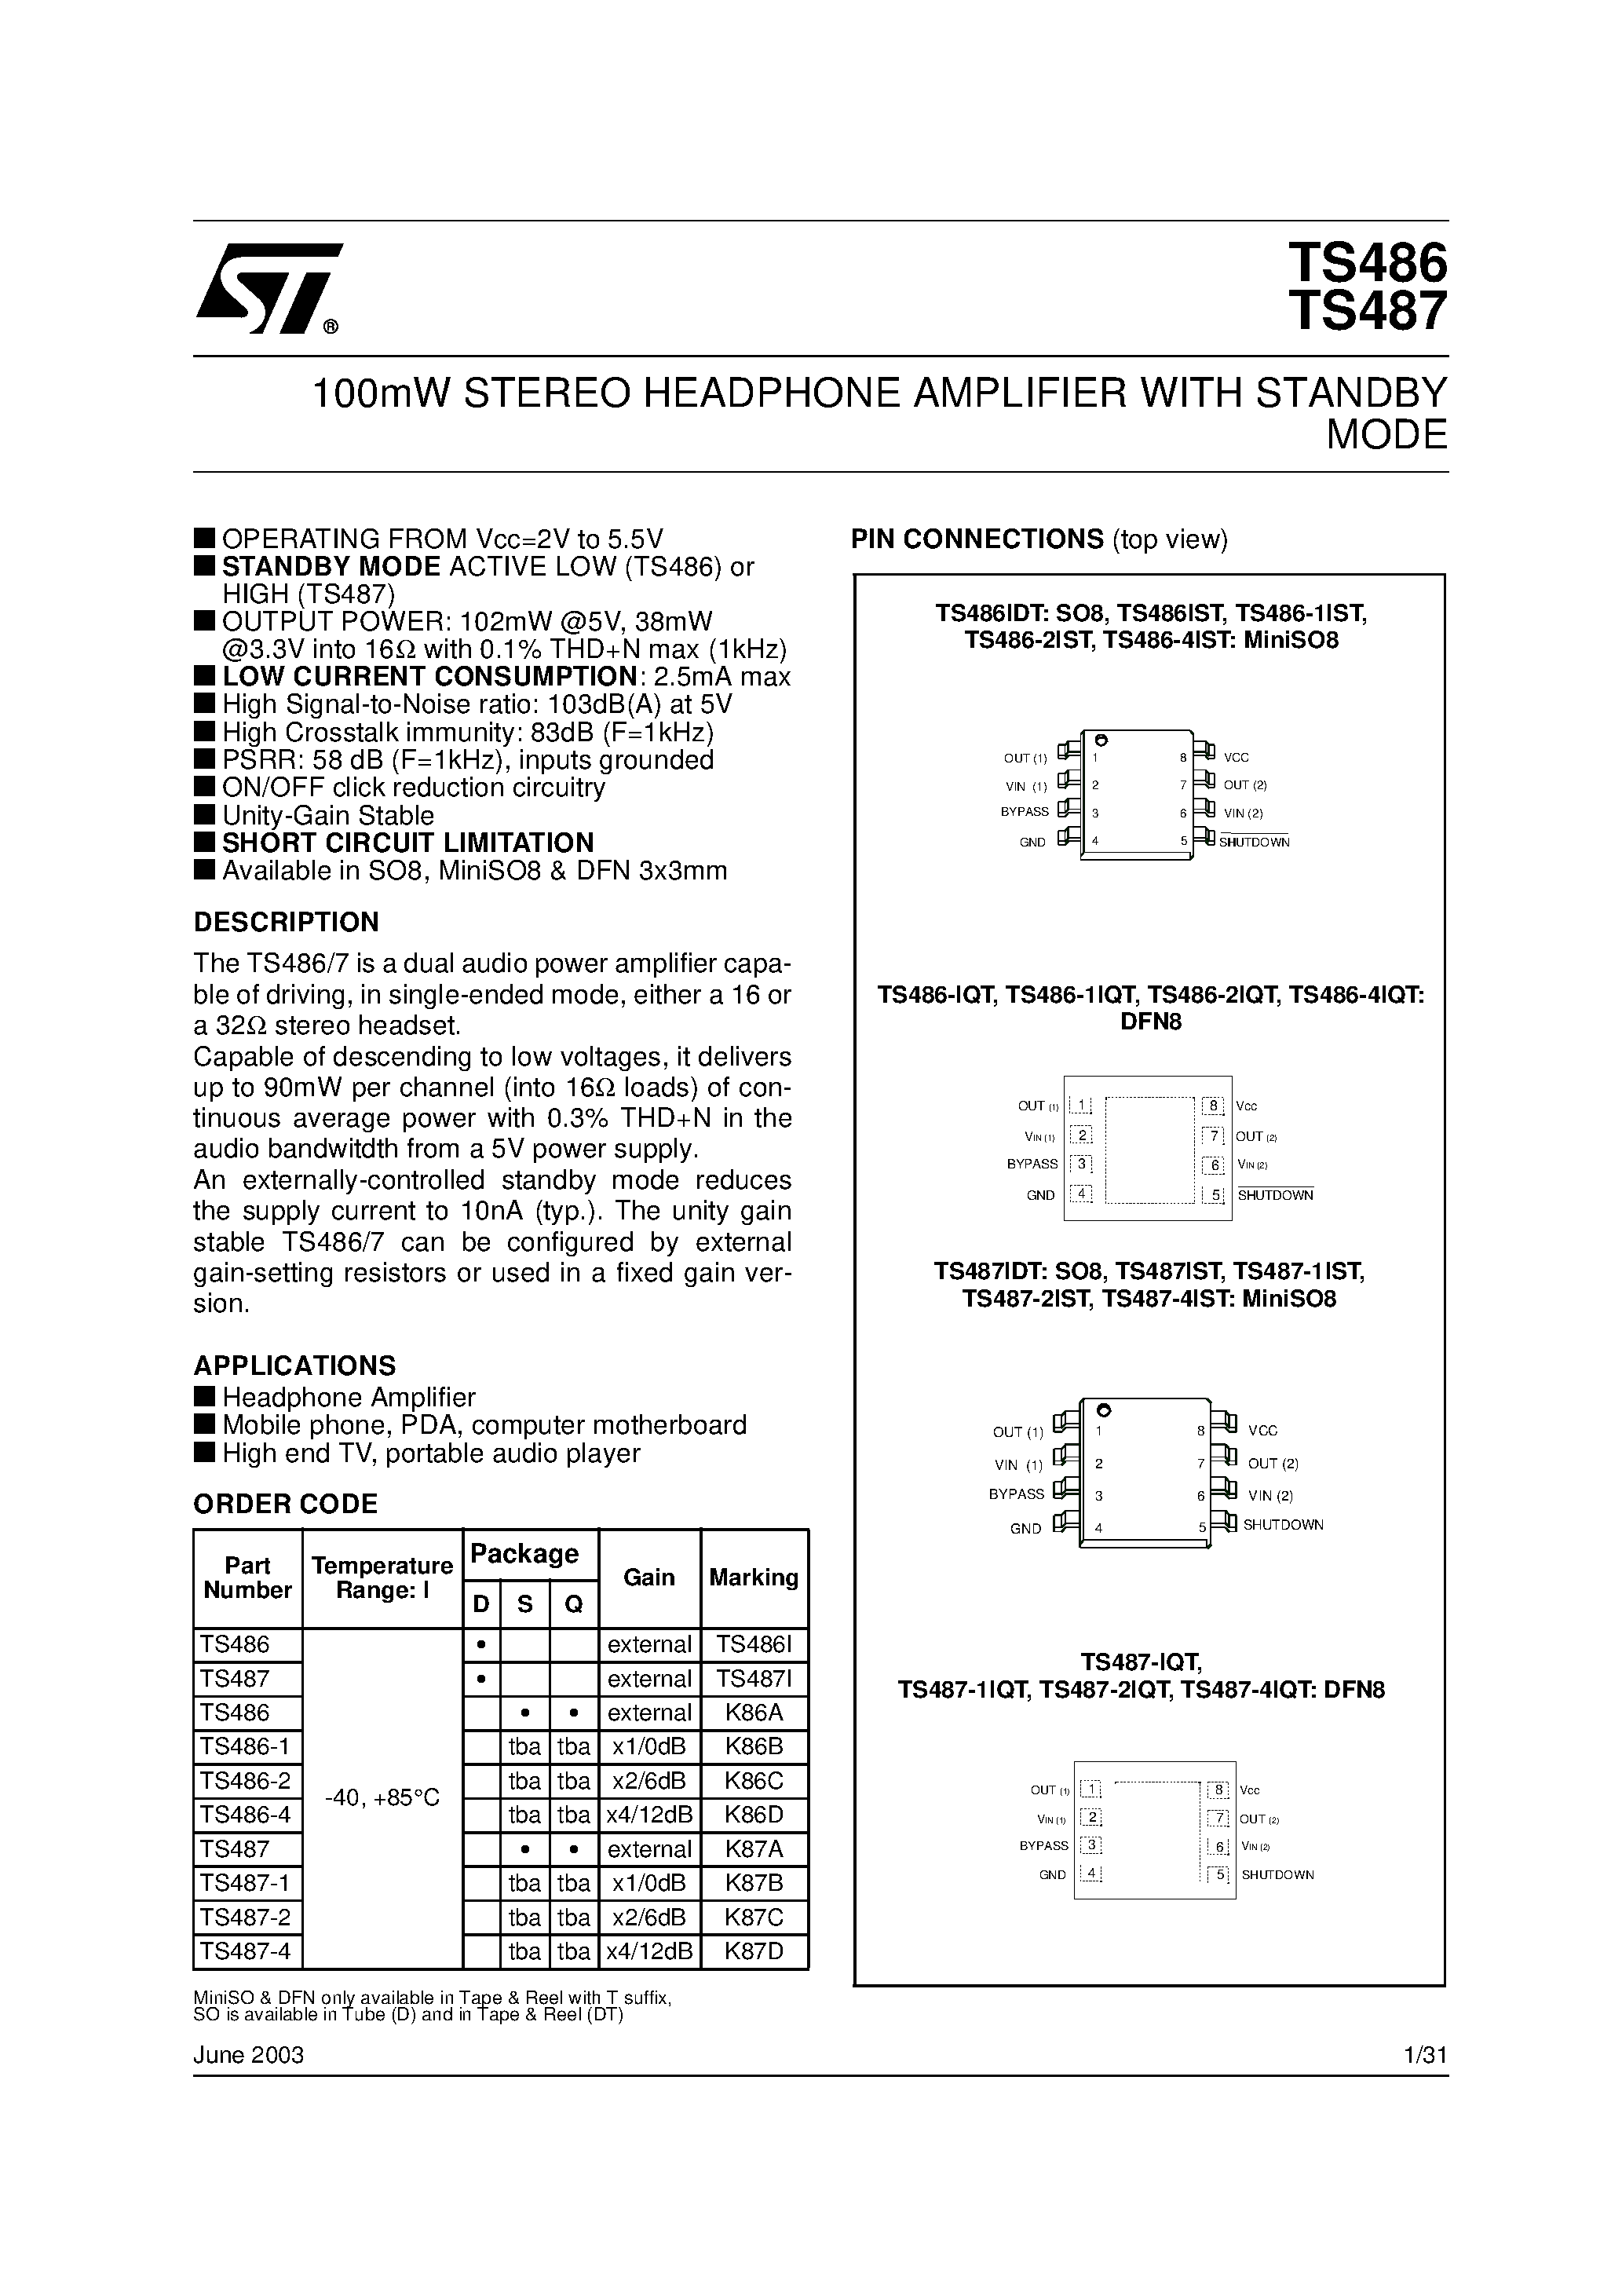 Datasheet TS487-2 - 100mW STEREO HEADPHONE AMPLIFIER WITH STANDBY MODE page 1